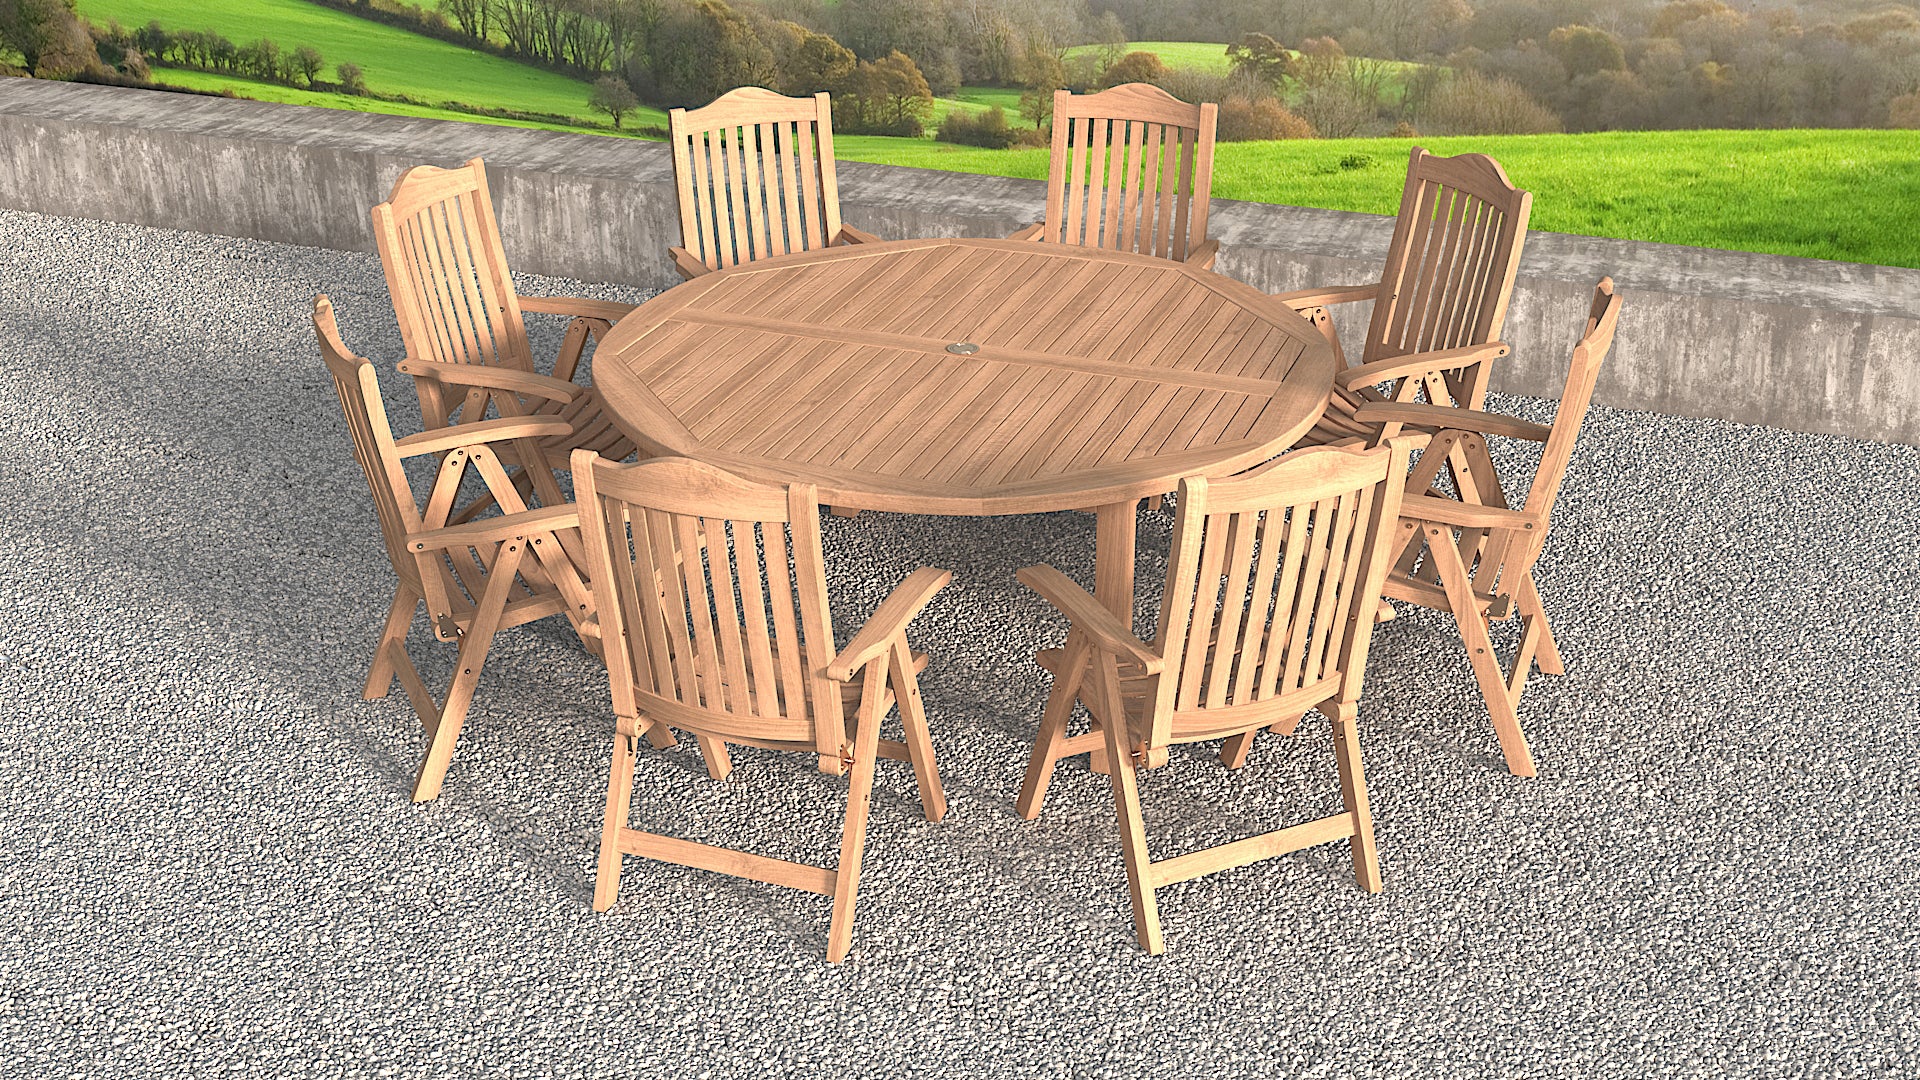 Teak Round fixed dining table and chair set top view